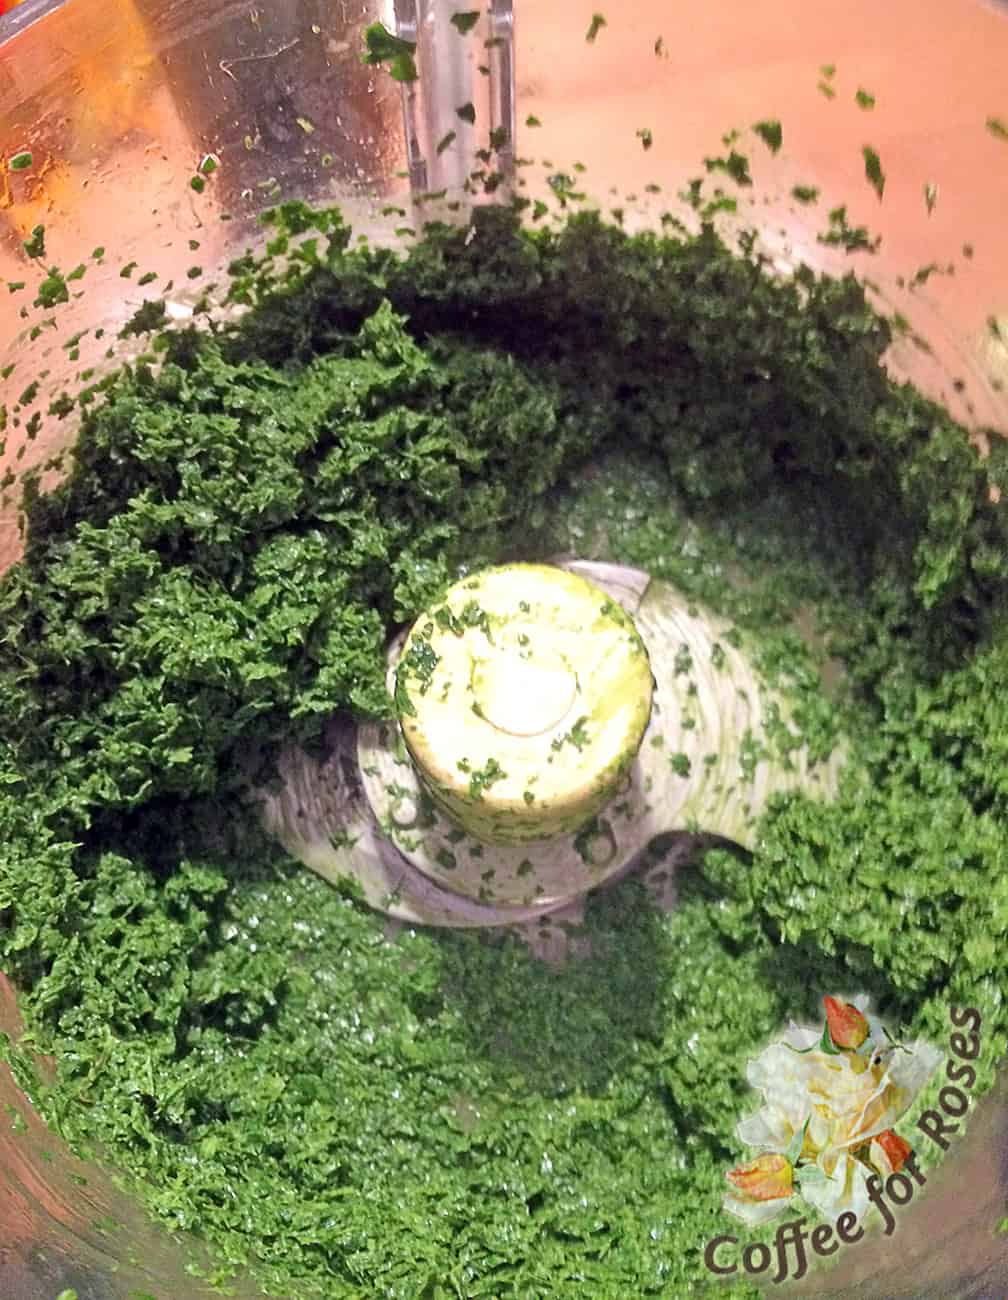 Put all the greens in a food processor with the olive oil and salt and pepper to taste. Blend well.